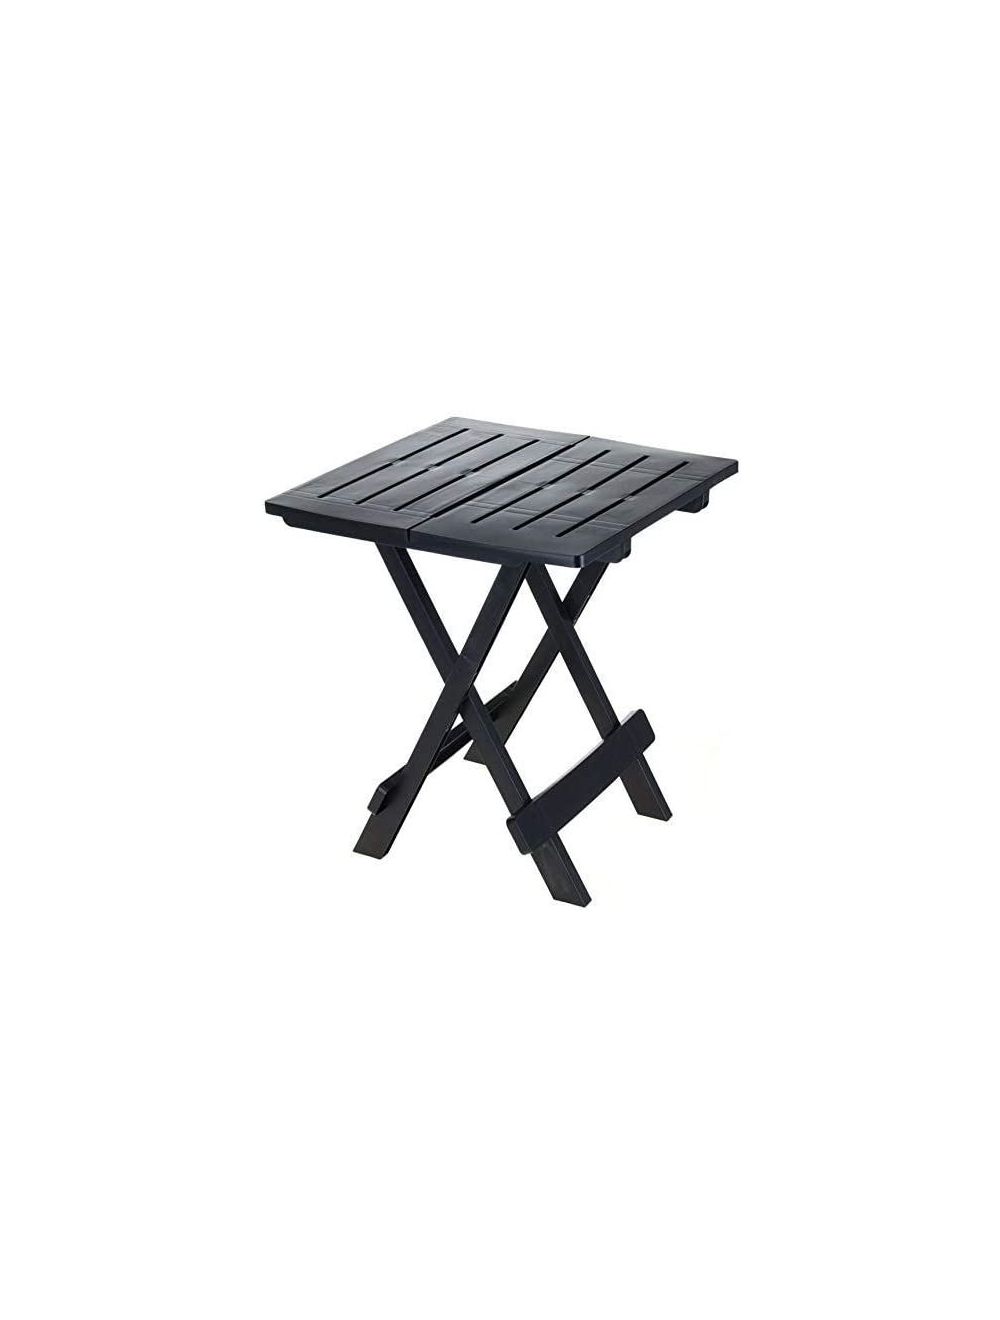 Adige Folding Table Small Garden or Camping Table Ideal as Side Table 